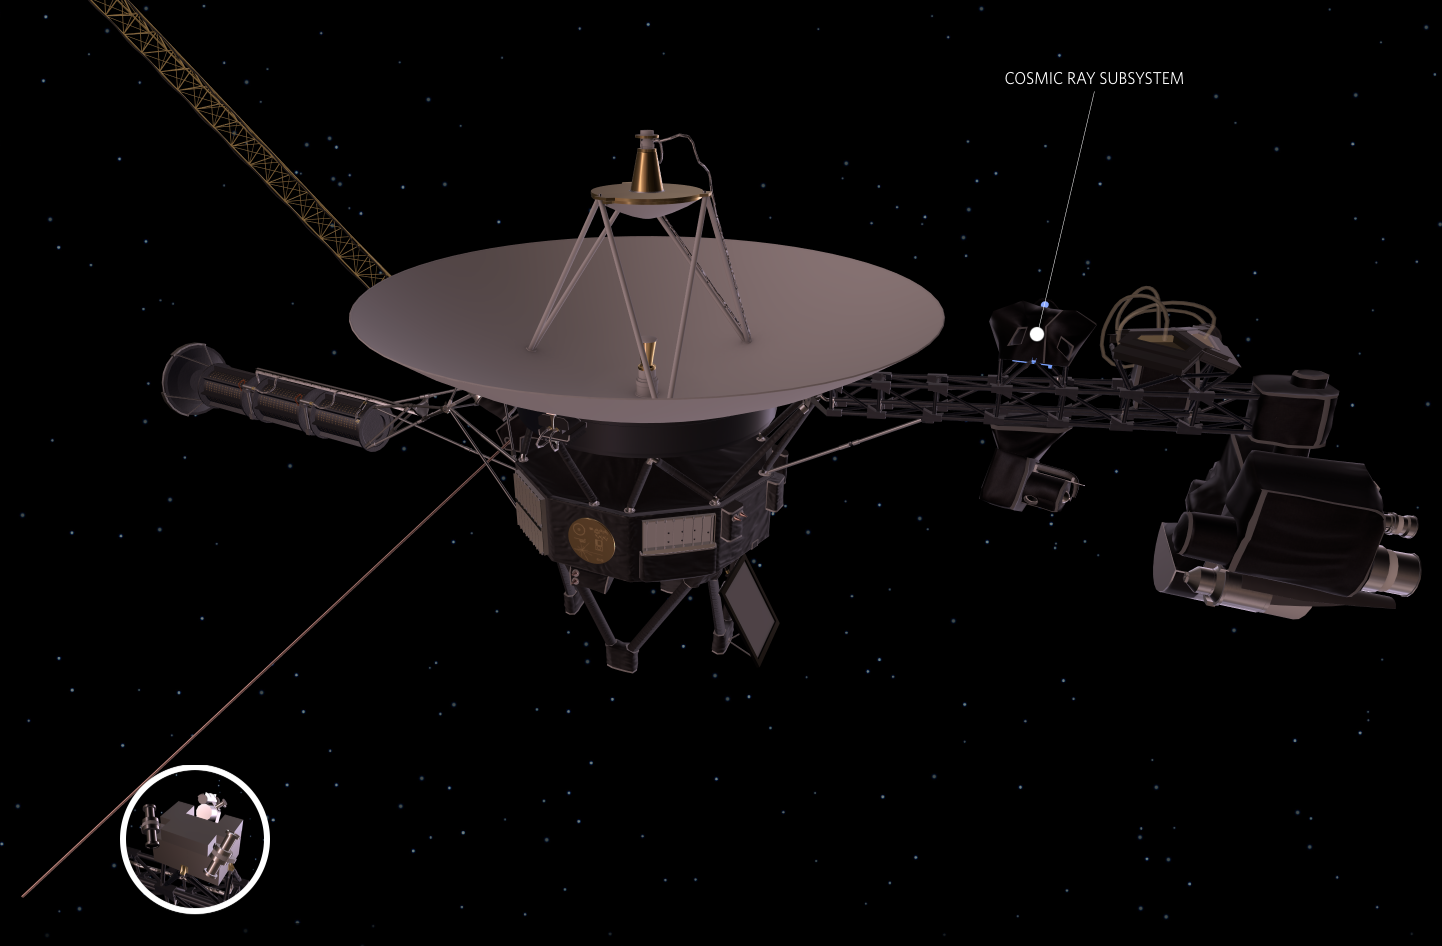 This artist's concept depicts one of NASA's Voyager spacecraft